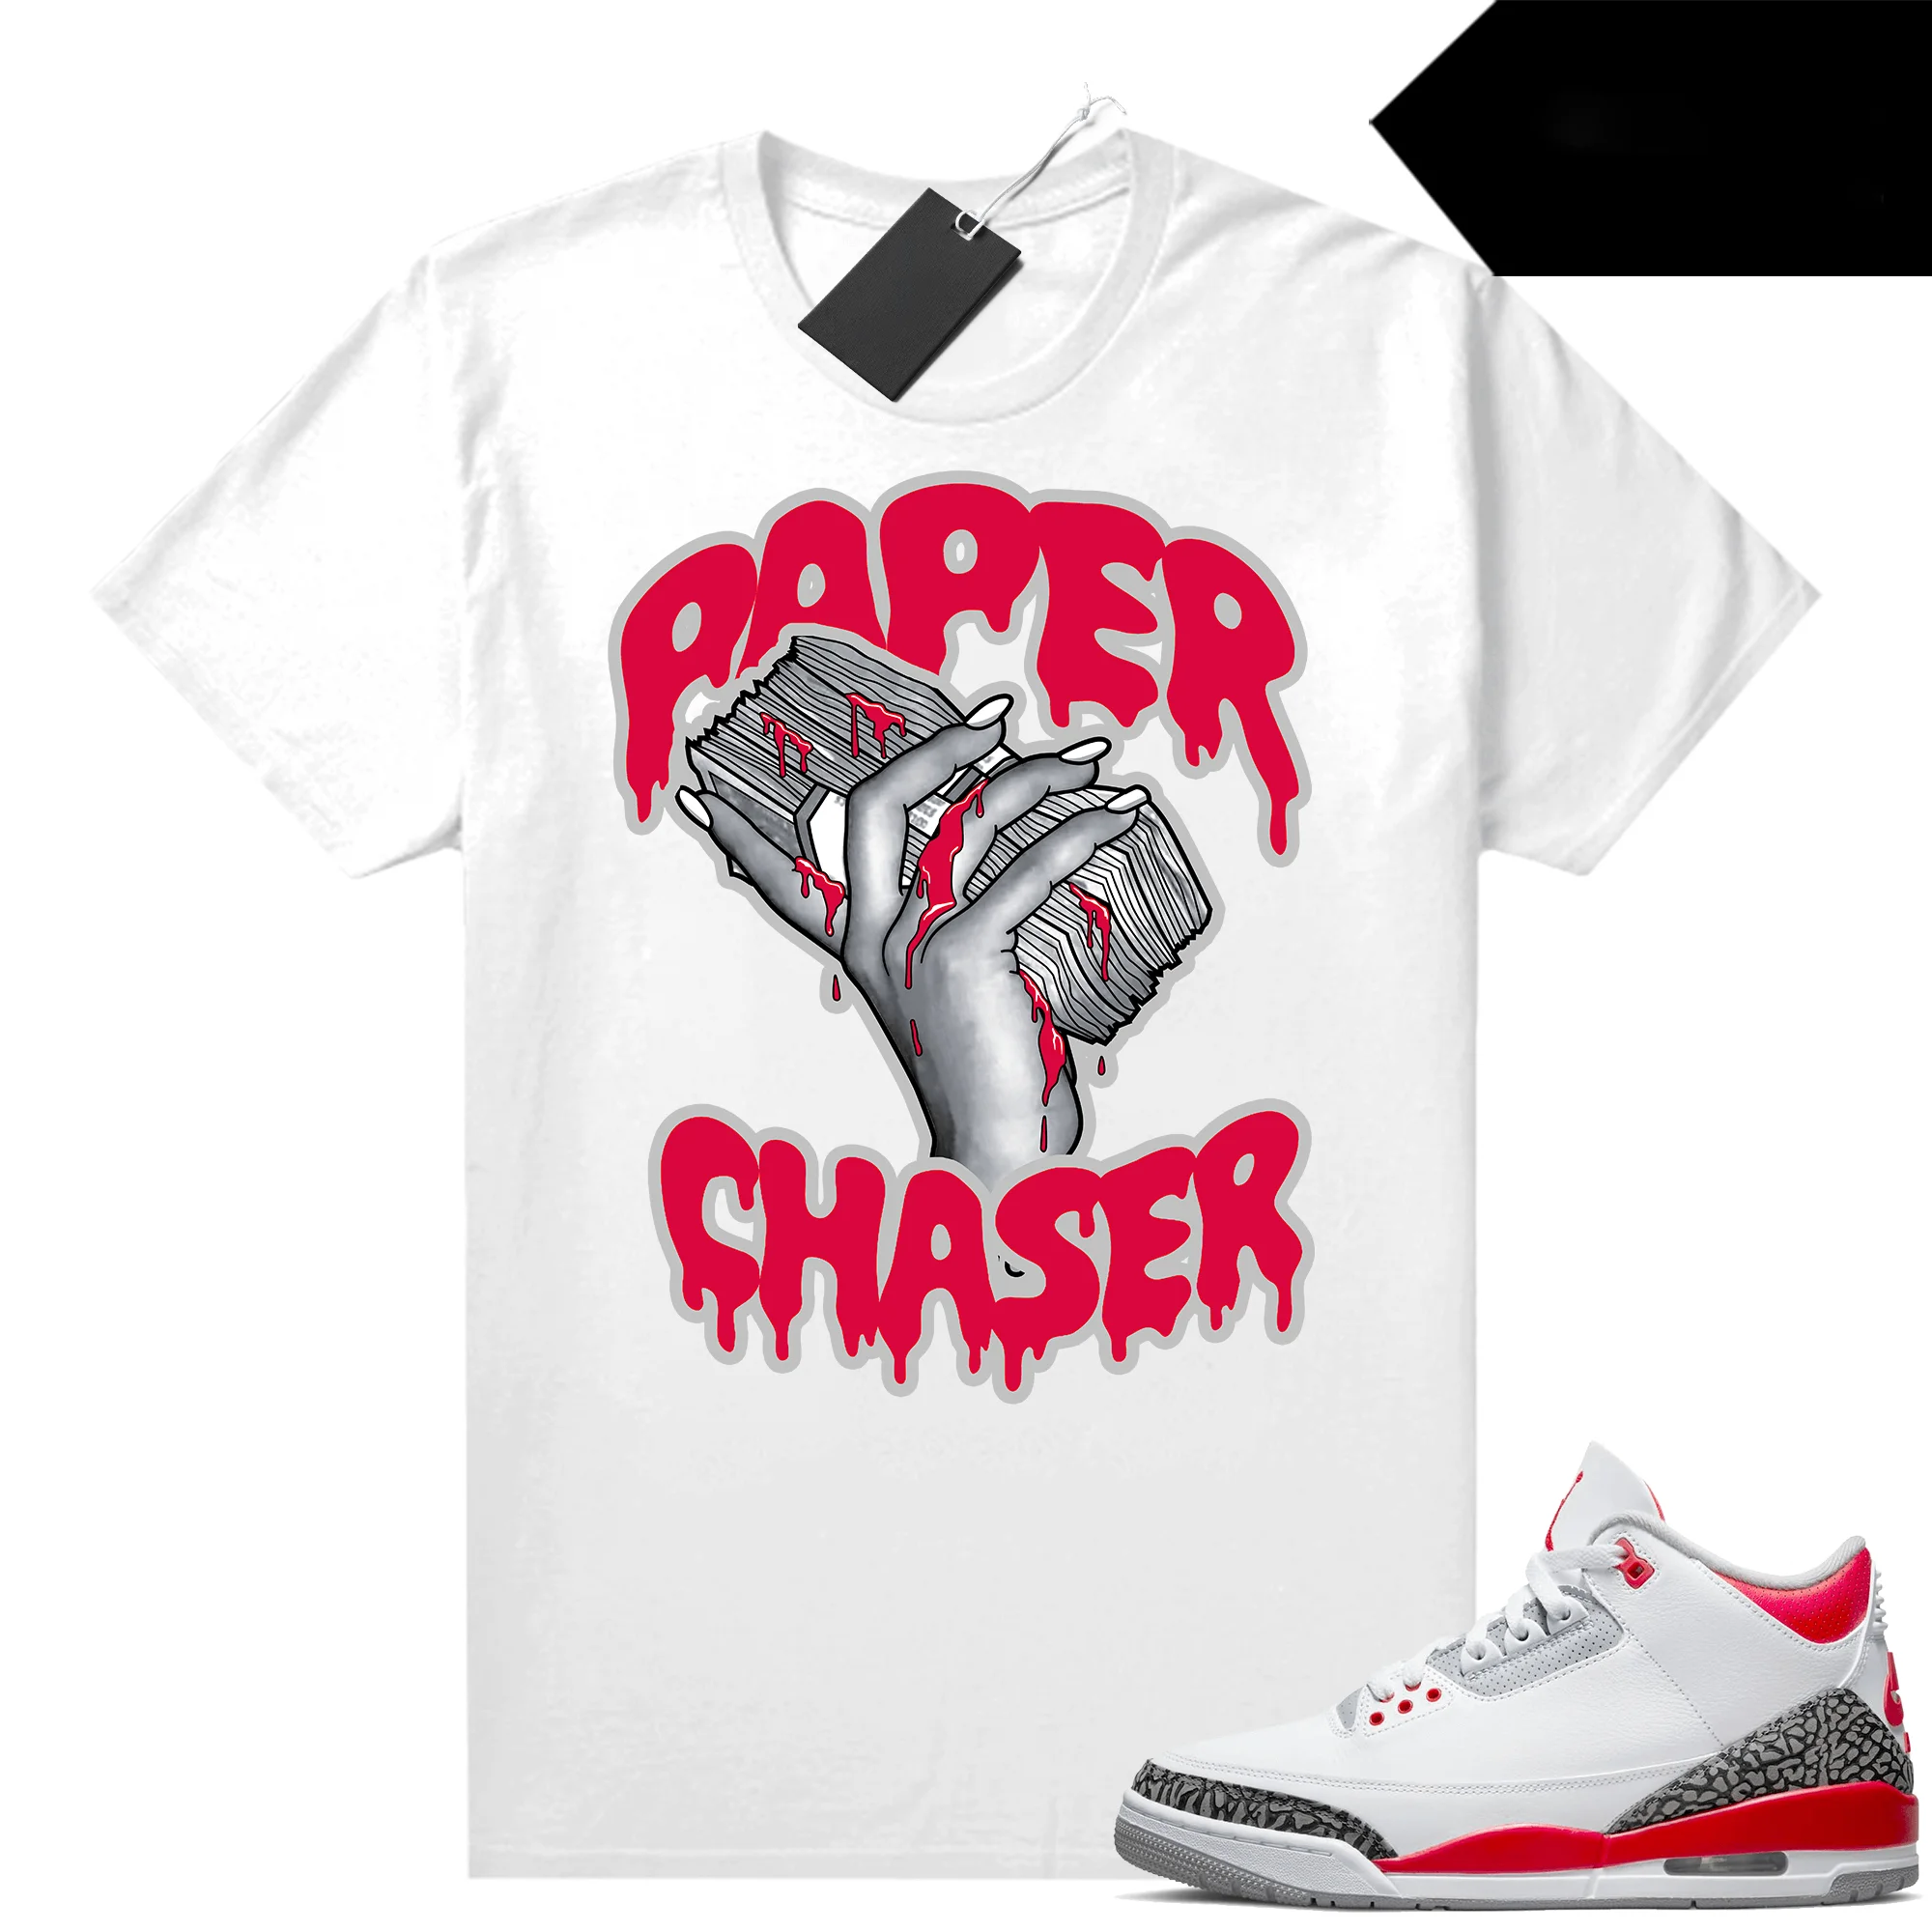 

Fire Red 3s Shirts Sneaker Match White Paper Chaser Sneaker Clothing 100% Cotton Unisex Graphic T Shirts For Men